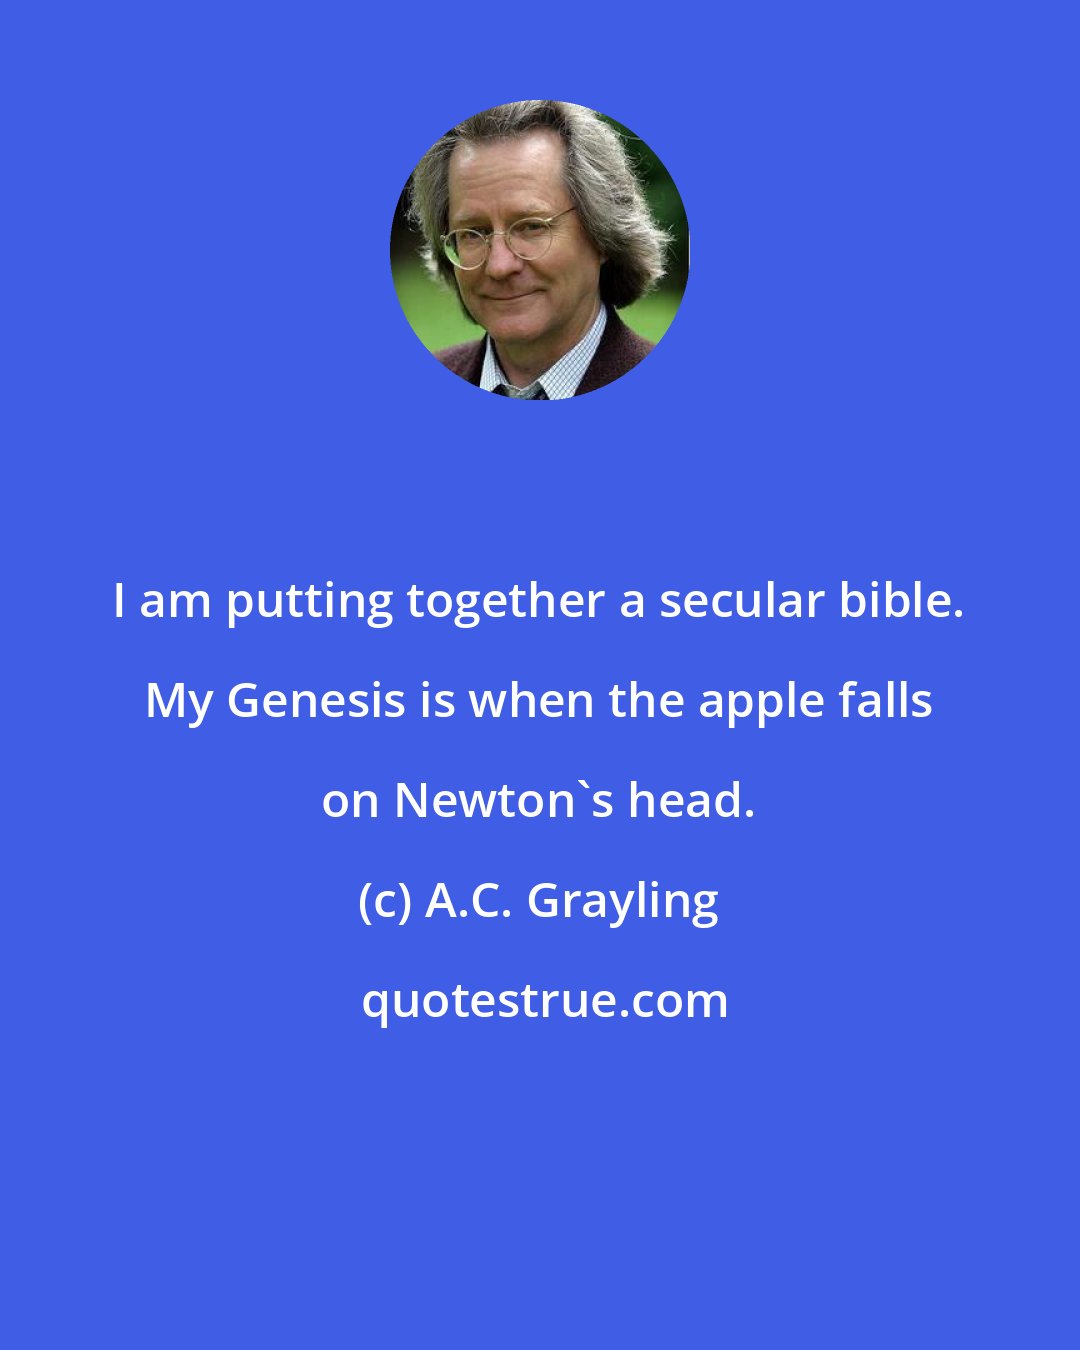 A.C. Grayling: I am putting together a secular bible. My Genesis is when the apple falls on Newton's head.